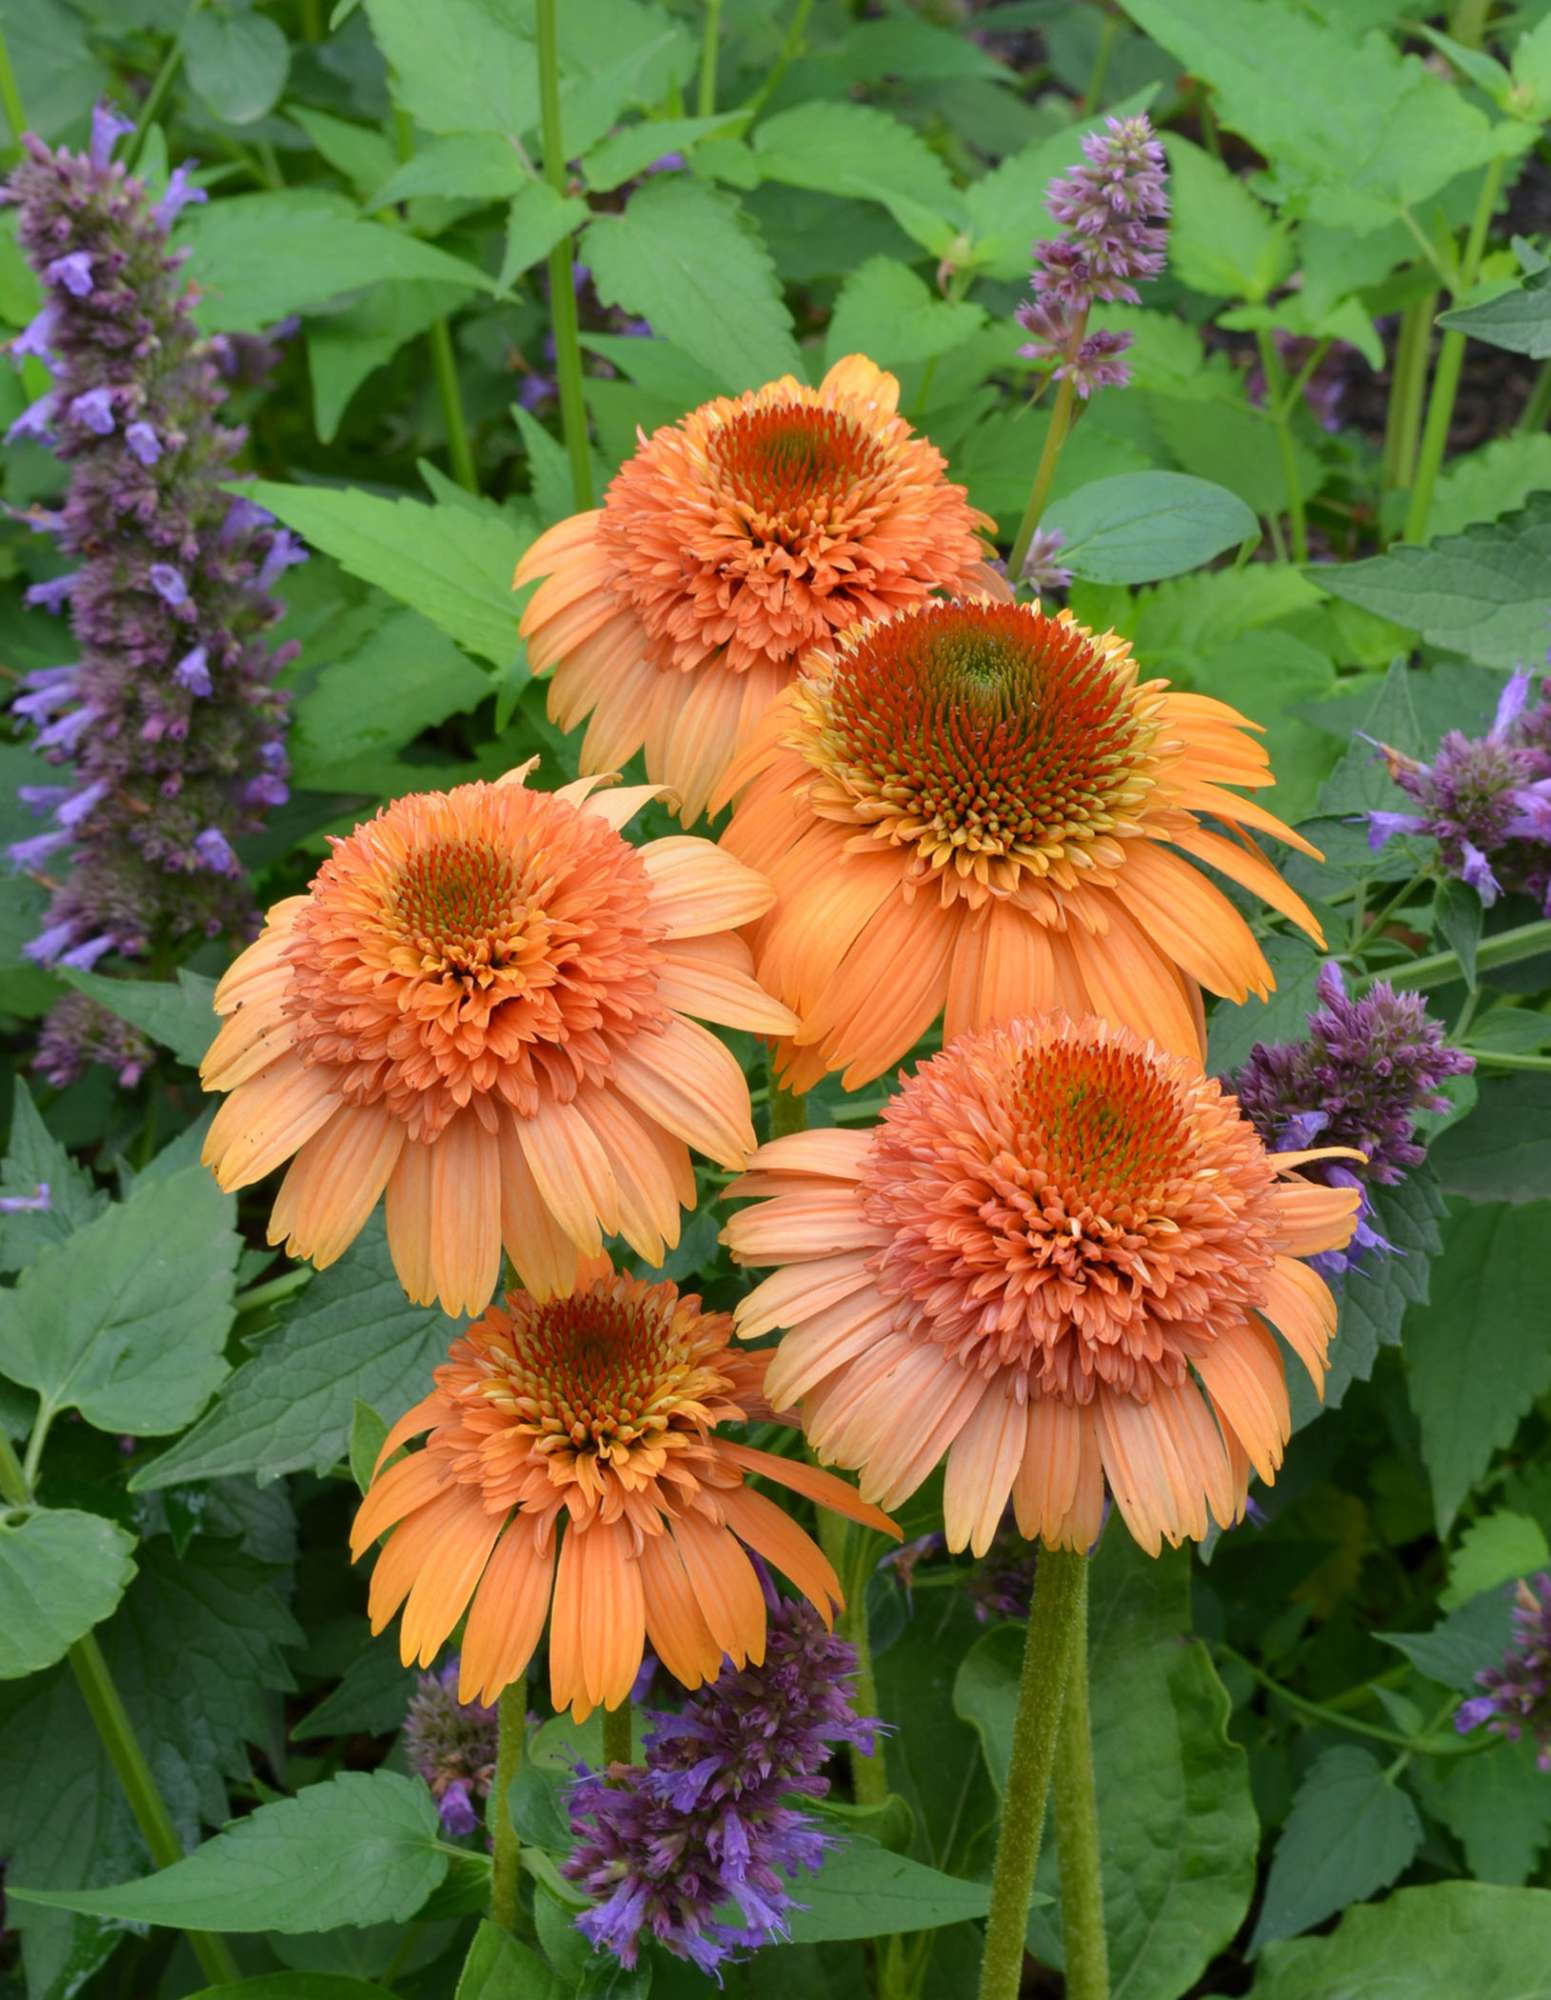 Echinacea 'Supreme Cantaloupe' from Blooms of Bressingham